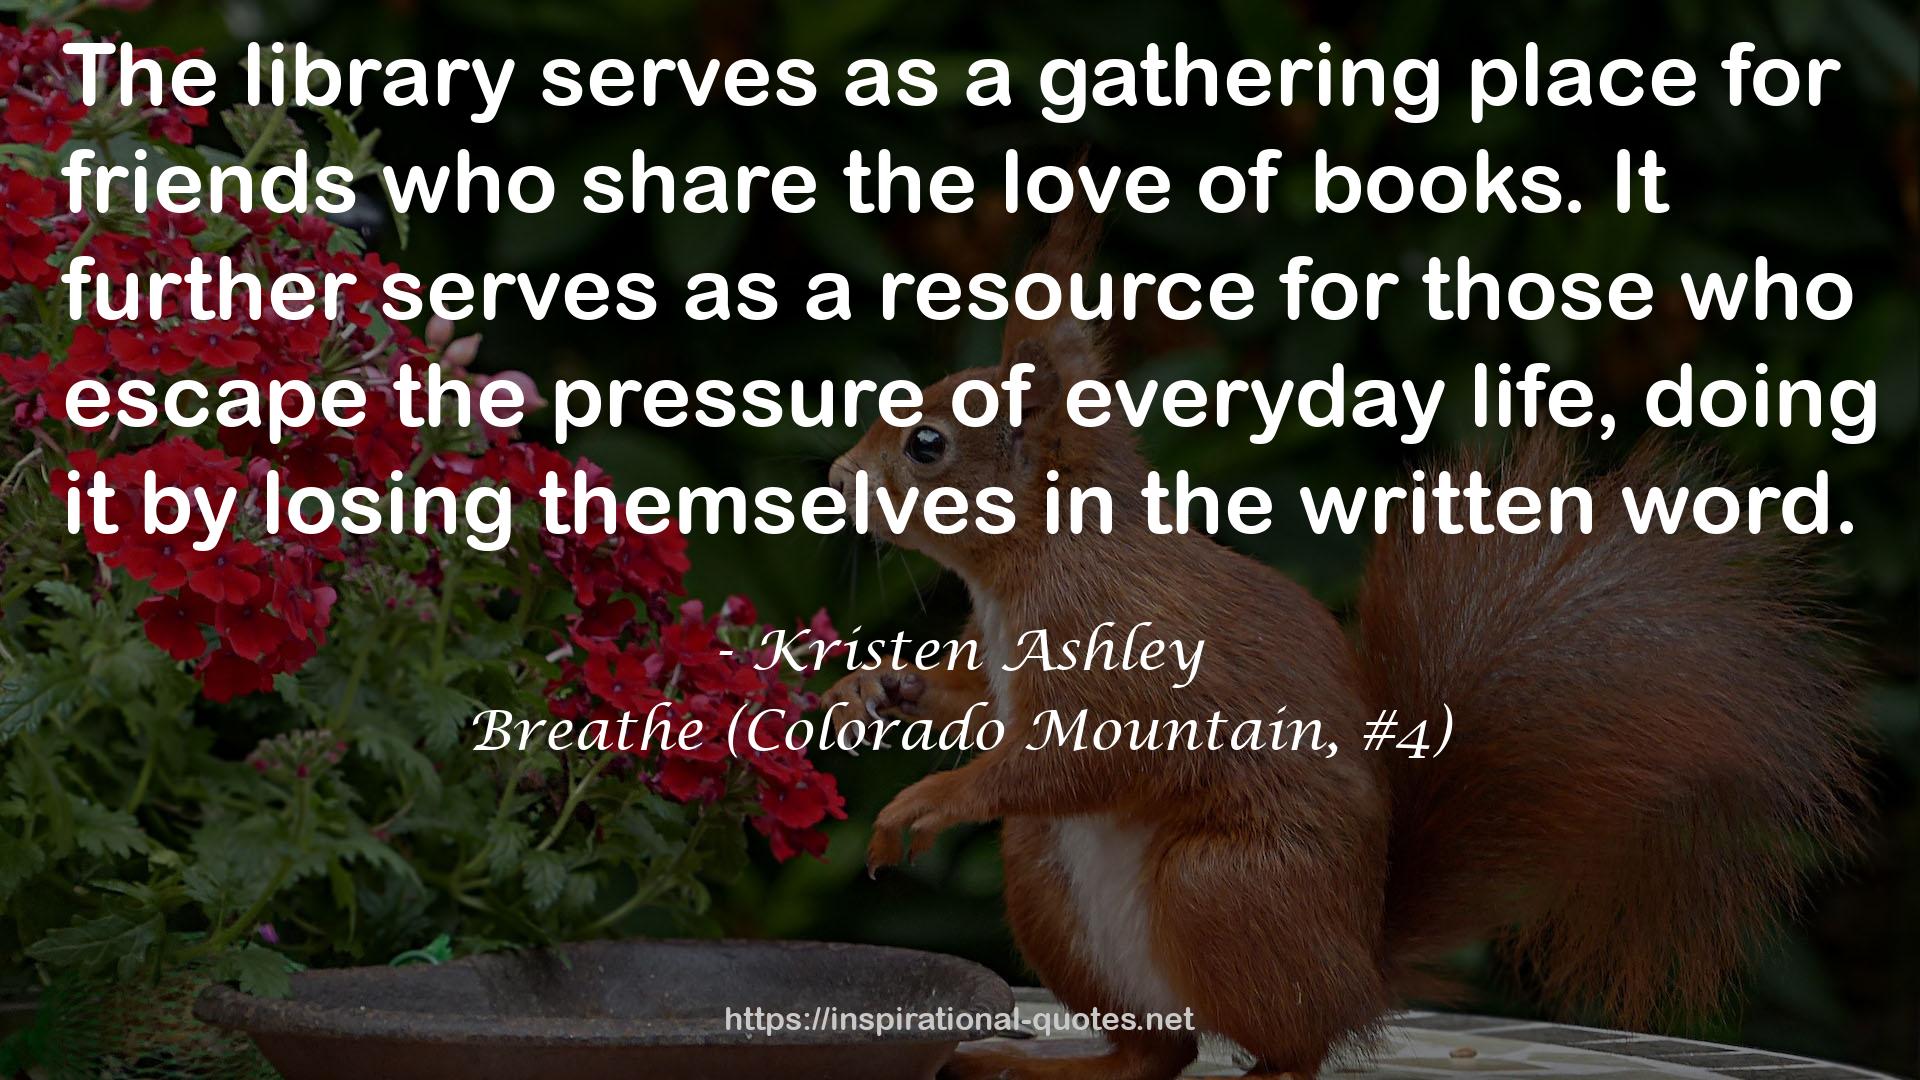 a gathering place  QUOTES